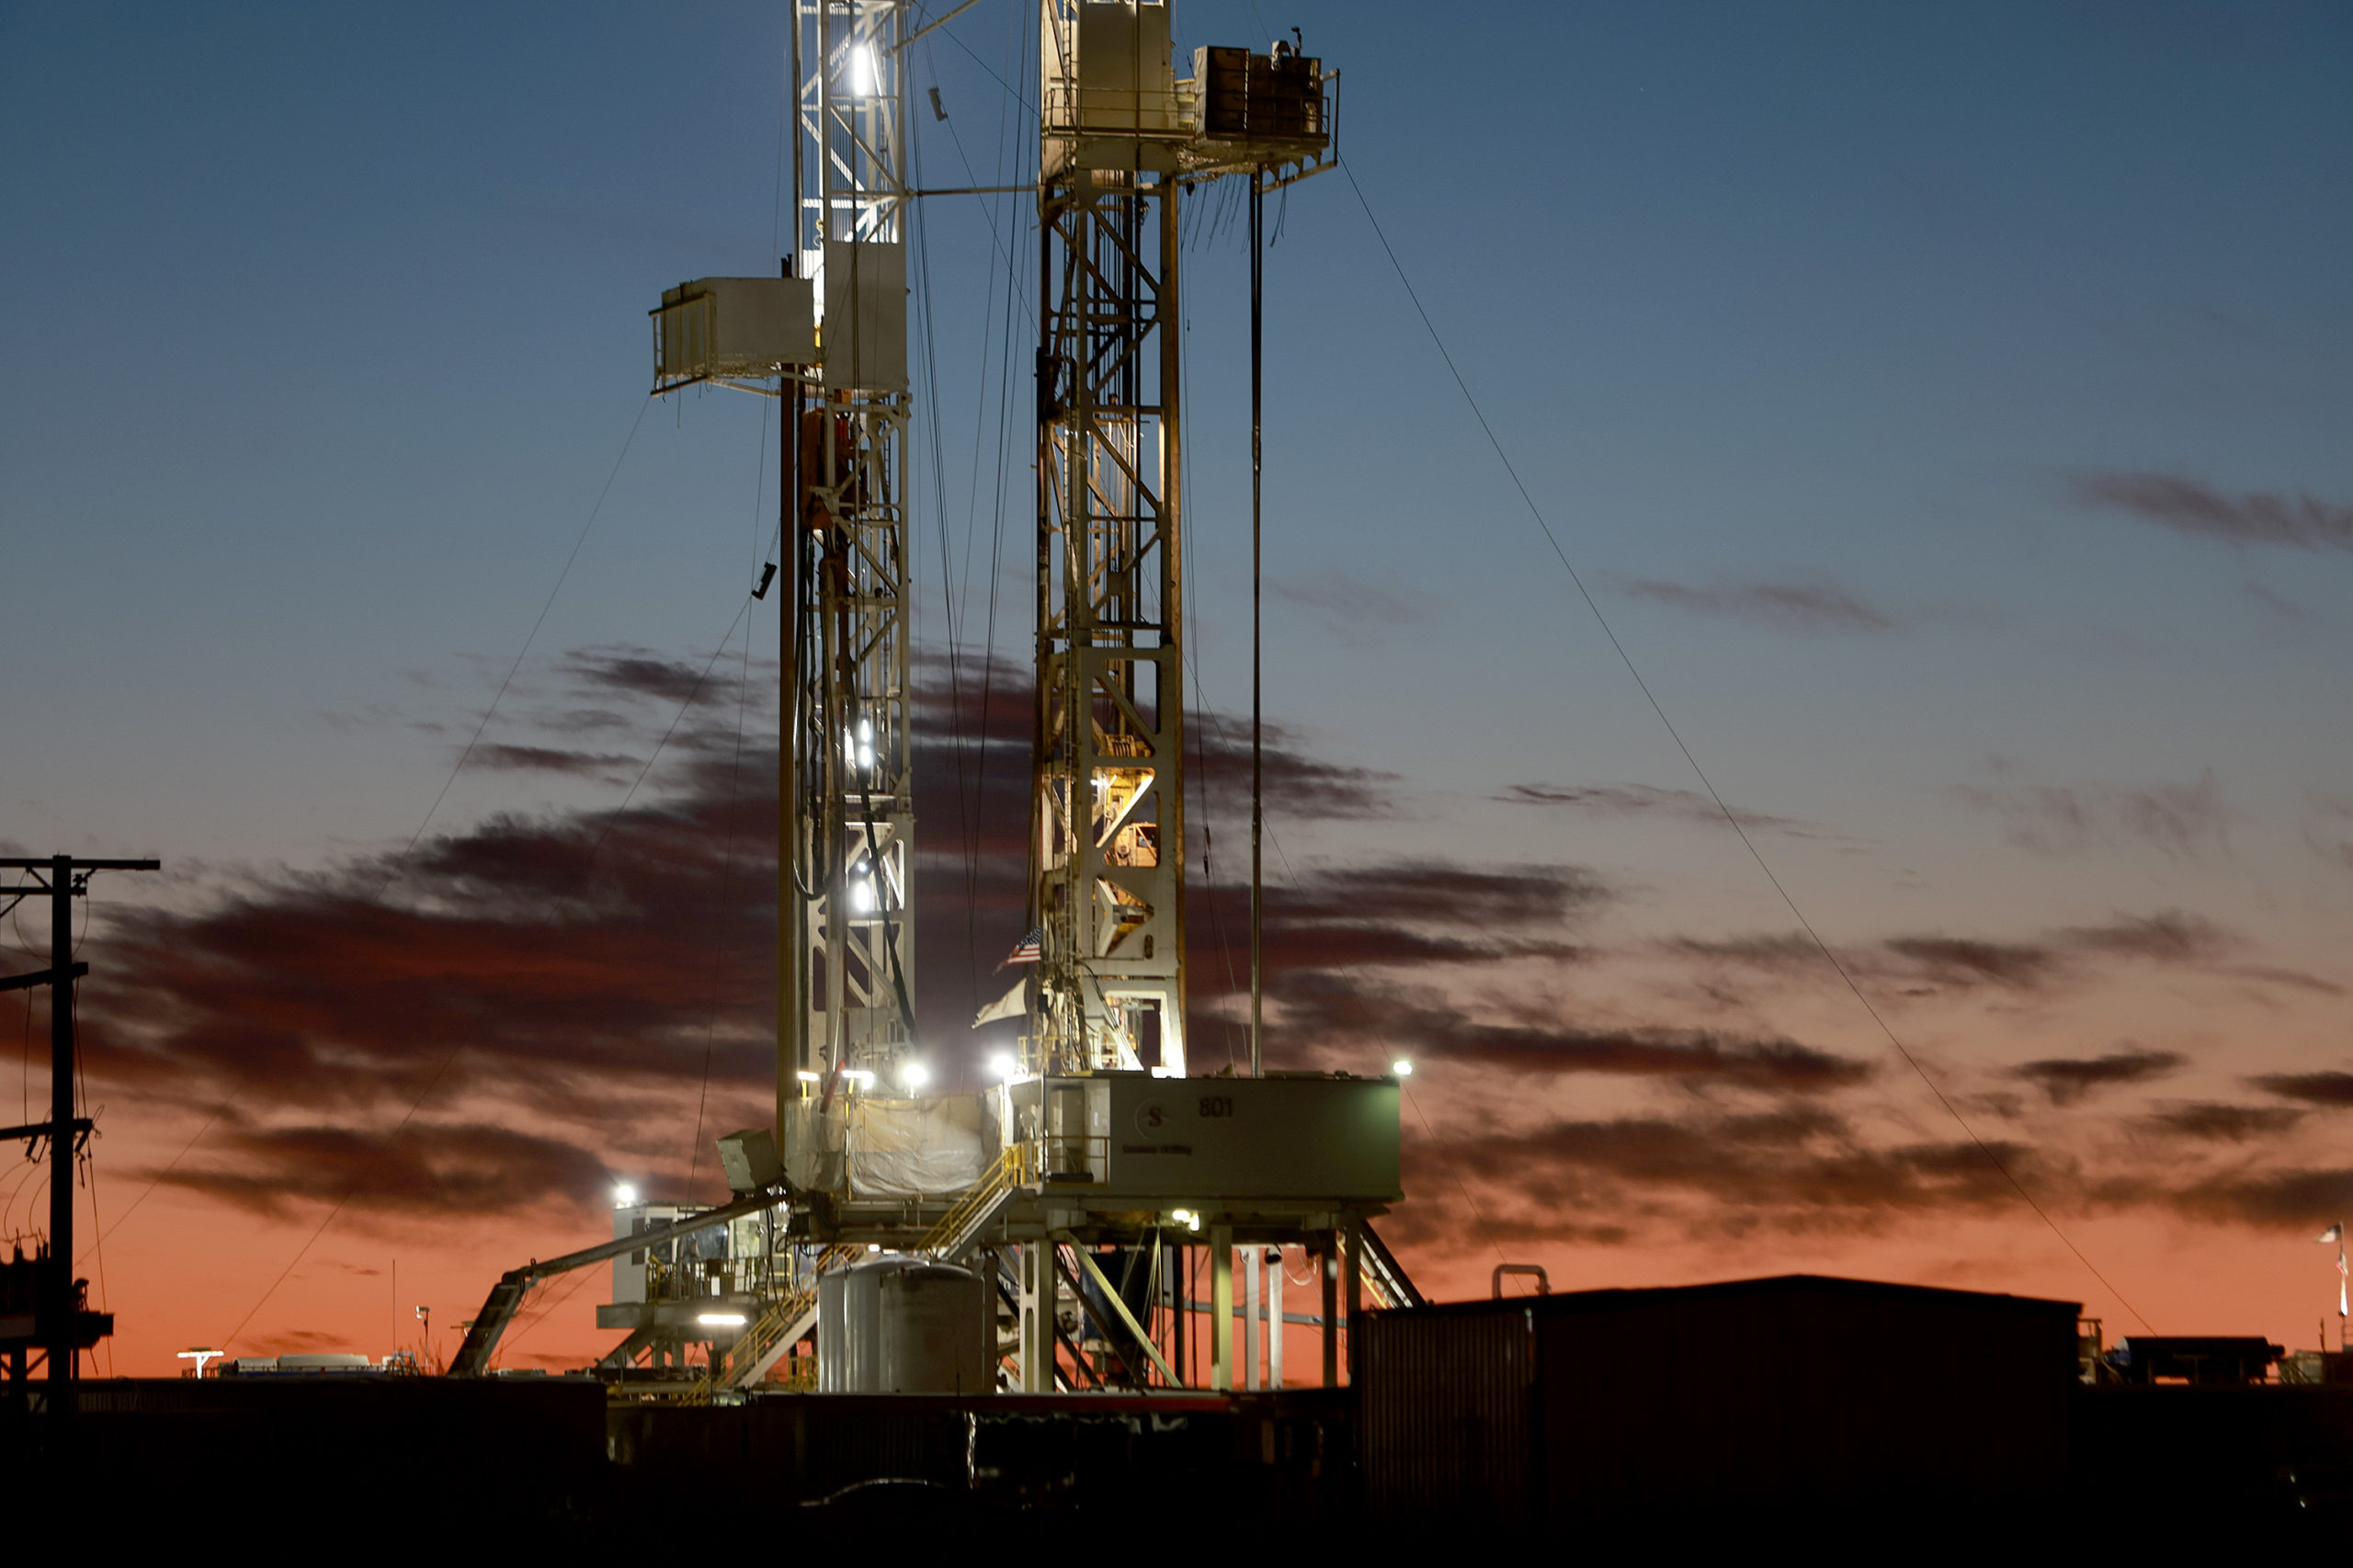 An oil drilling rig setup in the Permian Basin oil field on March 13 in Midland, Texas. (Joe Raedle/Getty Images)